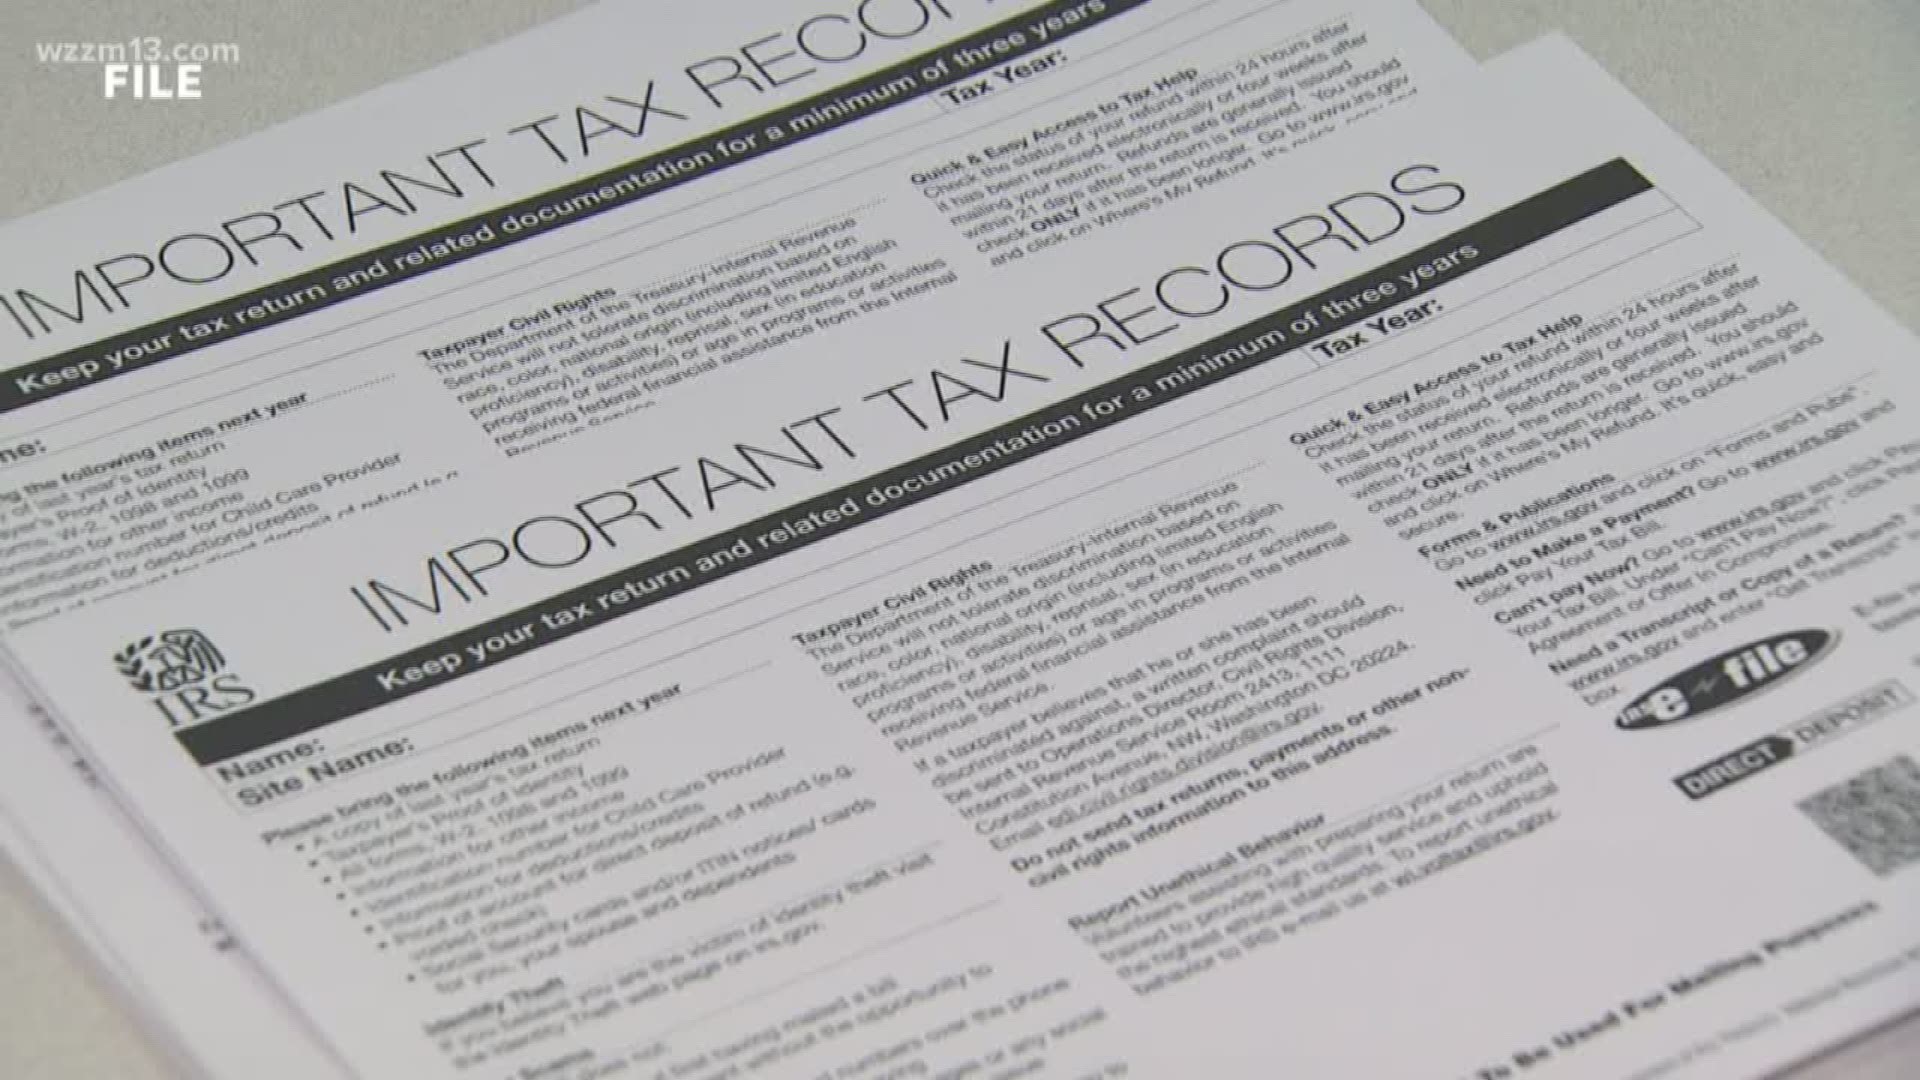 Tax Day may have been months ago, but many Americans are still stressed-out over the IRS. Millions of tax payers are receiving notices about lingering tax problems. But, help is on the way. 13 ON YOUR SIDE'S Angela Cunningham was live at the Heart of West Michigan United Way to share how you can get that help if you need it.